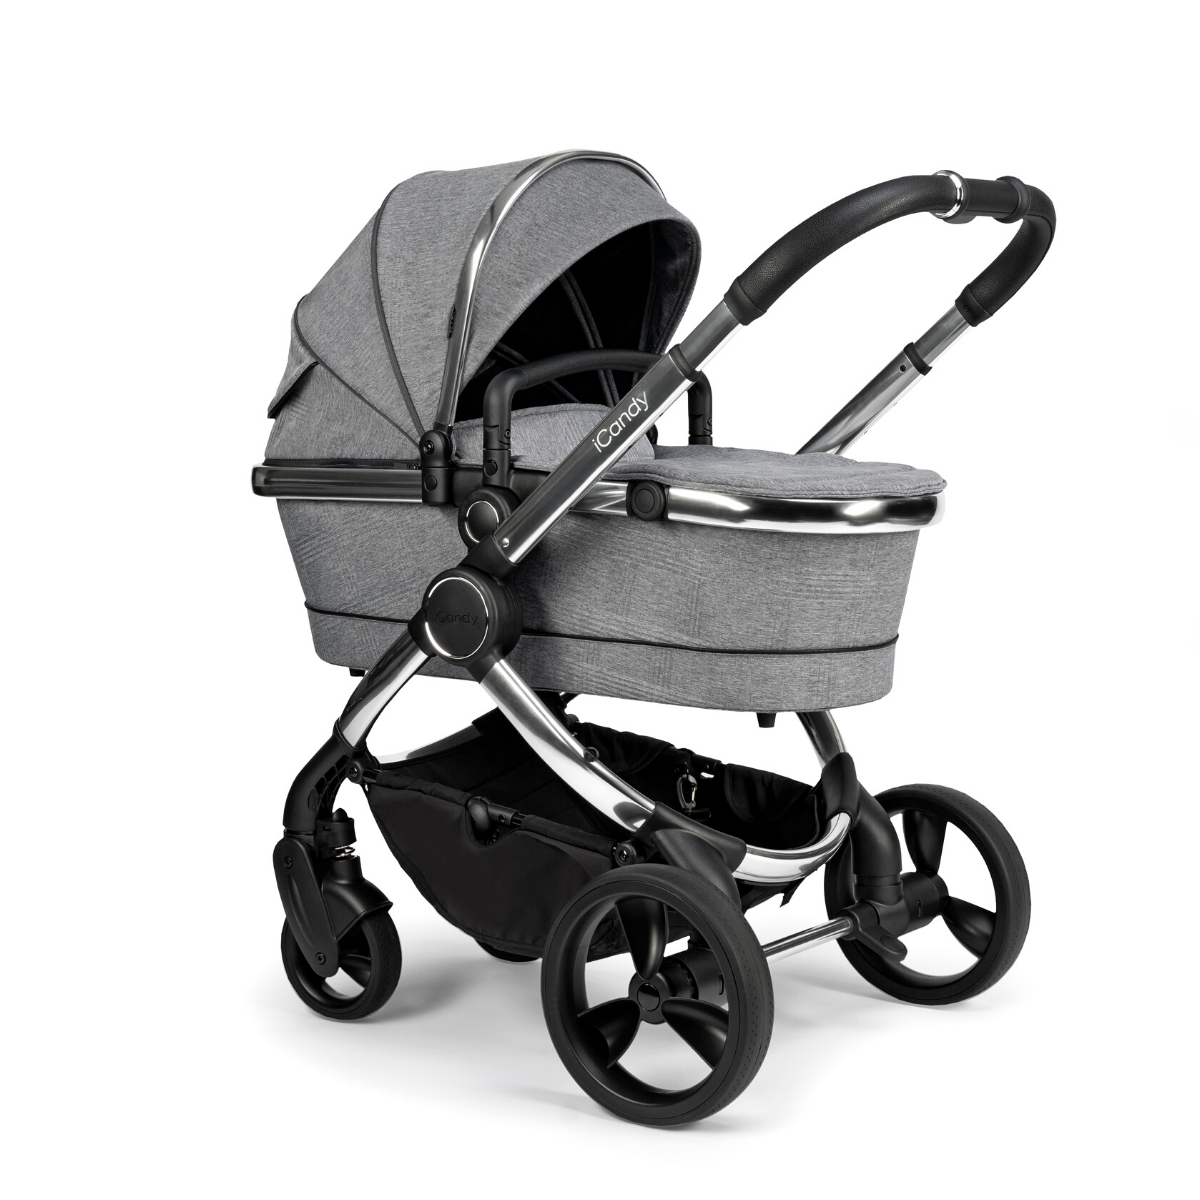 icandy carrycot liner